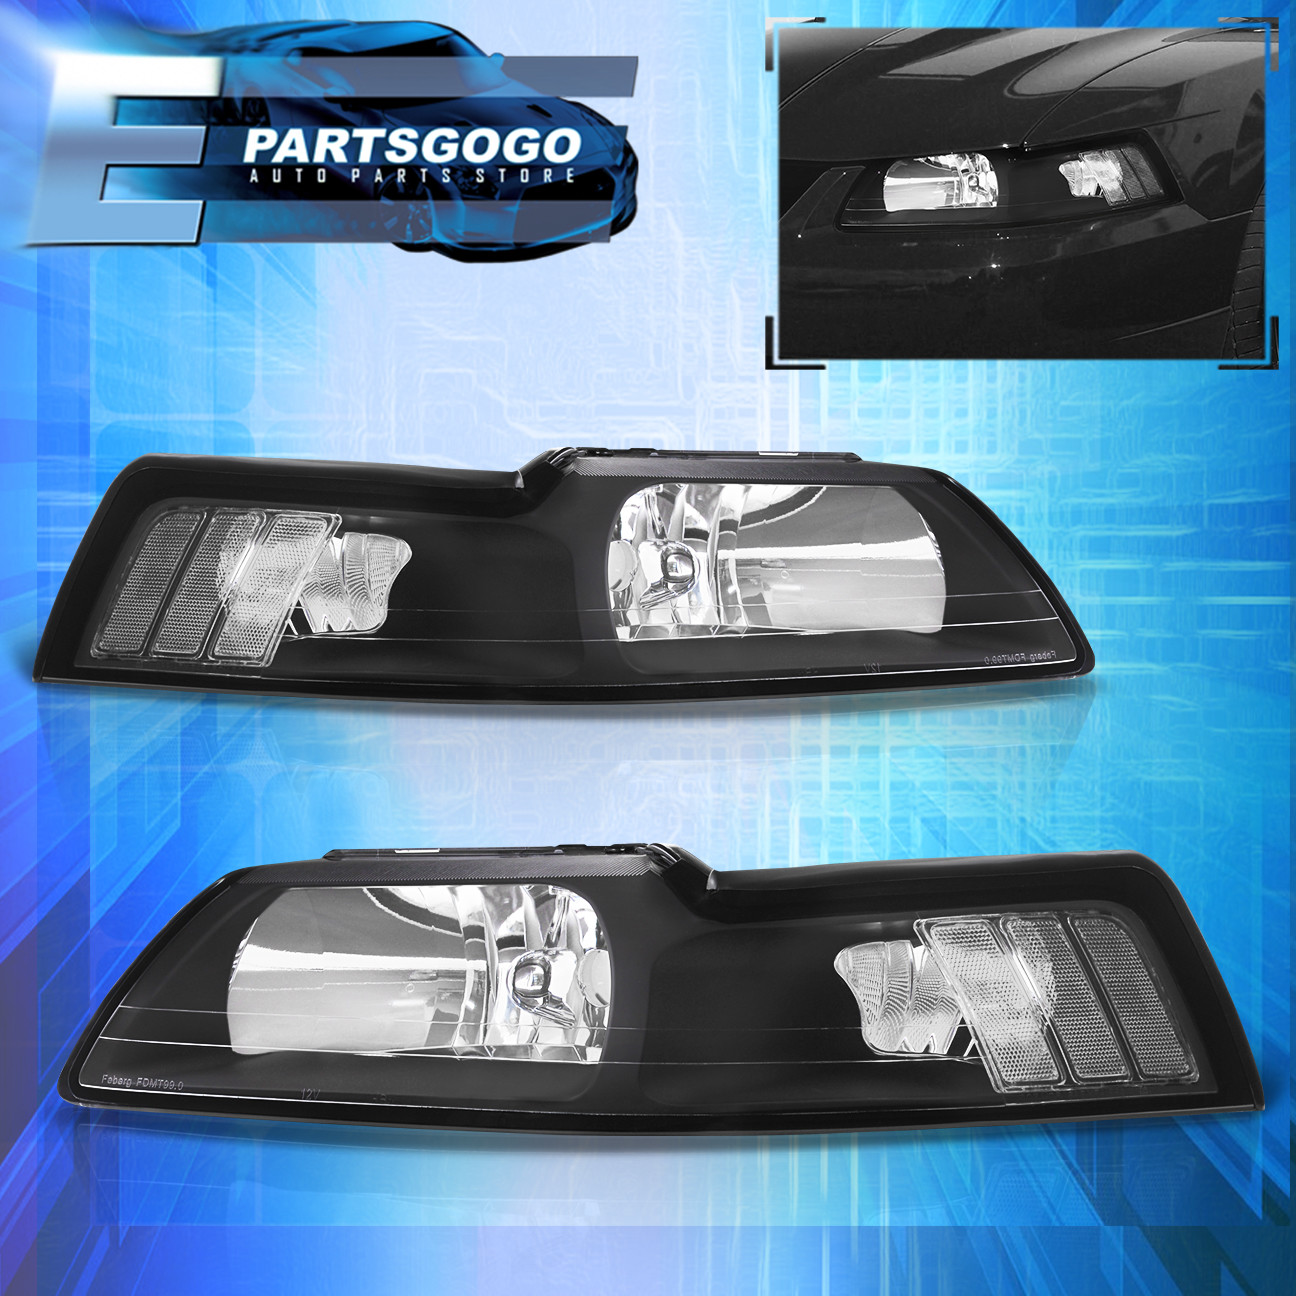 Details About For 99 04 Mustang Gt Crystal Black Headlights Lamp Corner Turn Signal Clear